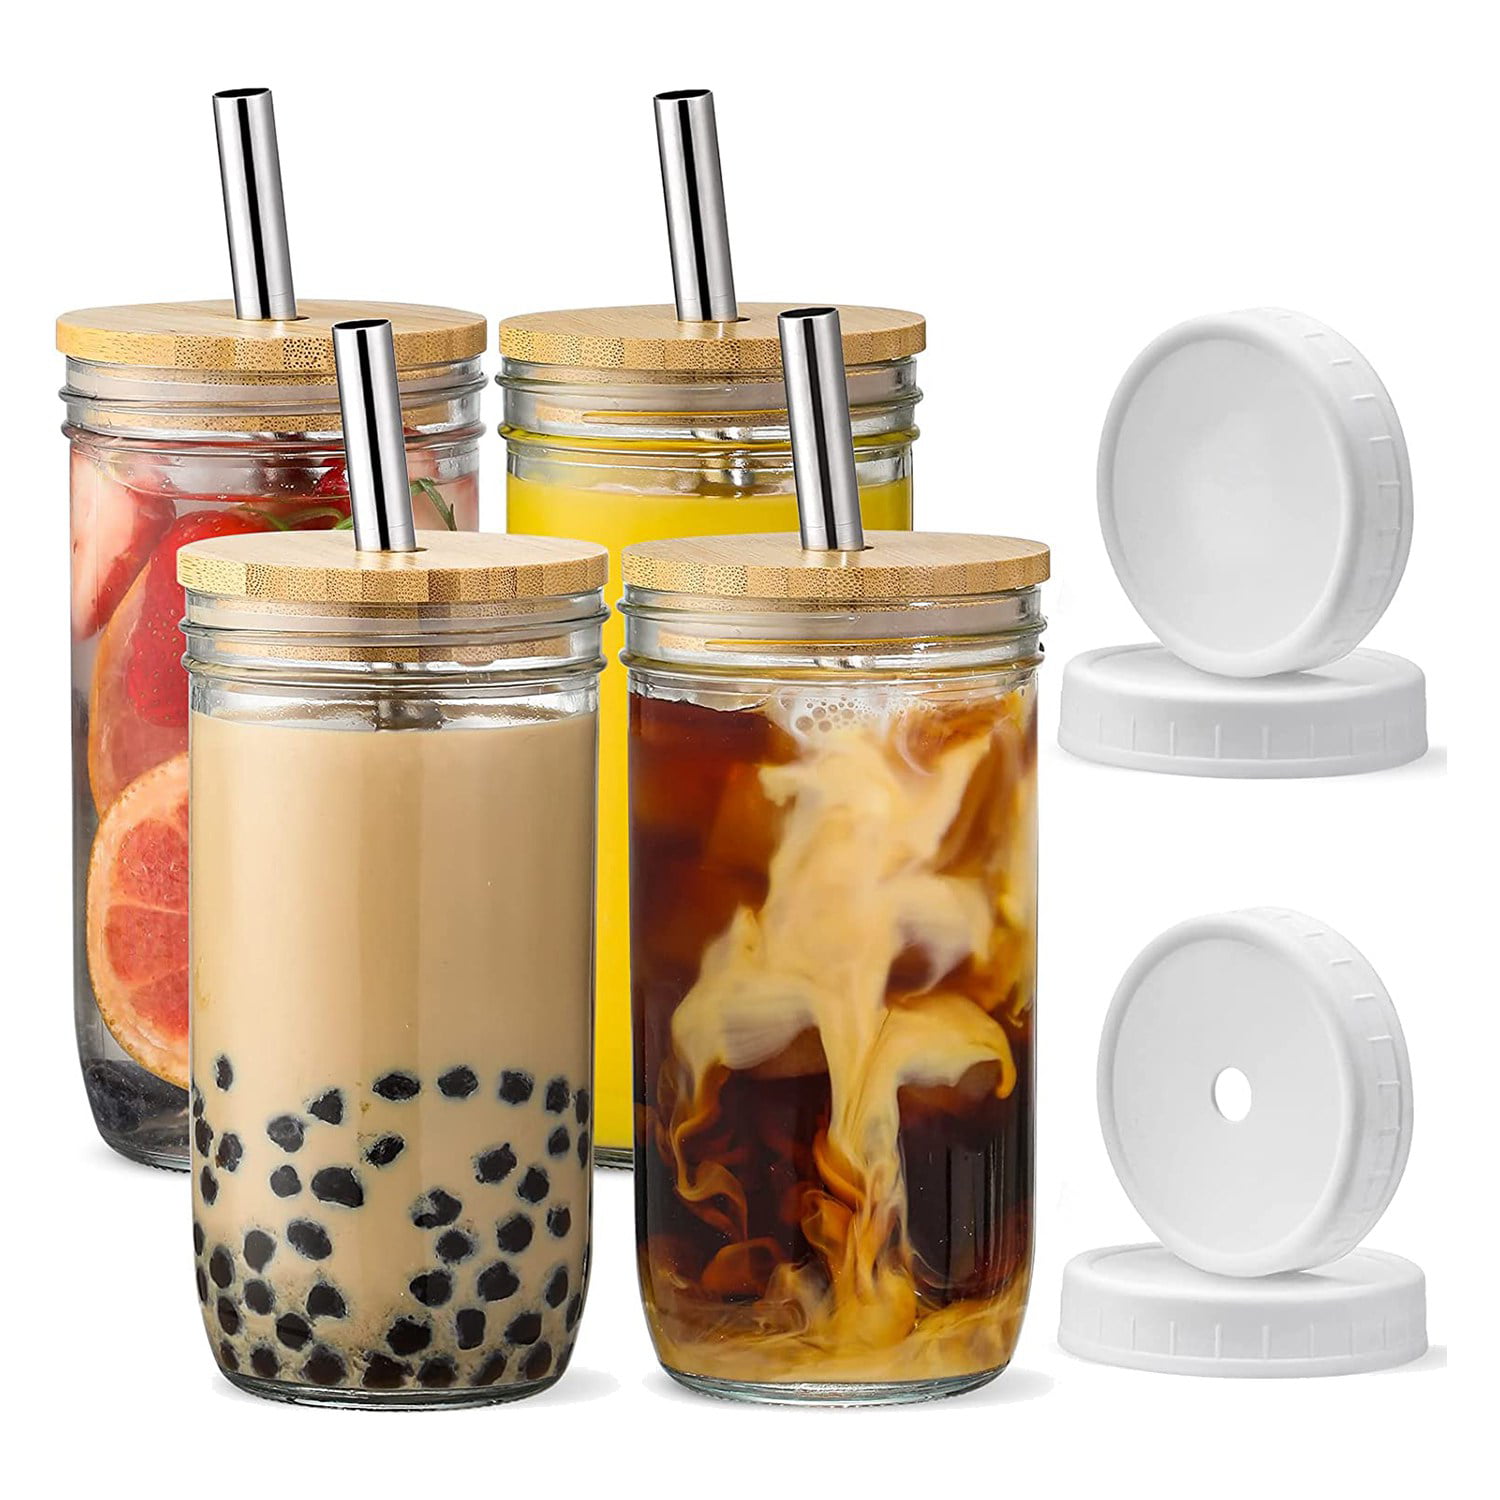 Hydraful 24 oz Glass Tumbler Cup with Bamboo Lid and Straw - 2 Pack, Mason  Jar Boba Tea Cup, Wide Mo…See more Hydraful 24 oz Glass Tumbler Cup with